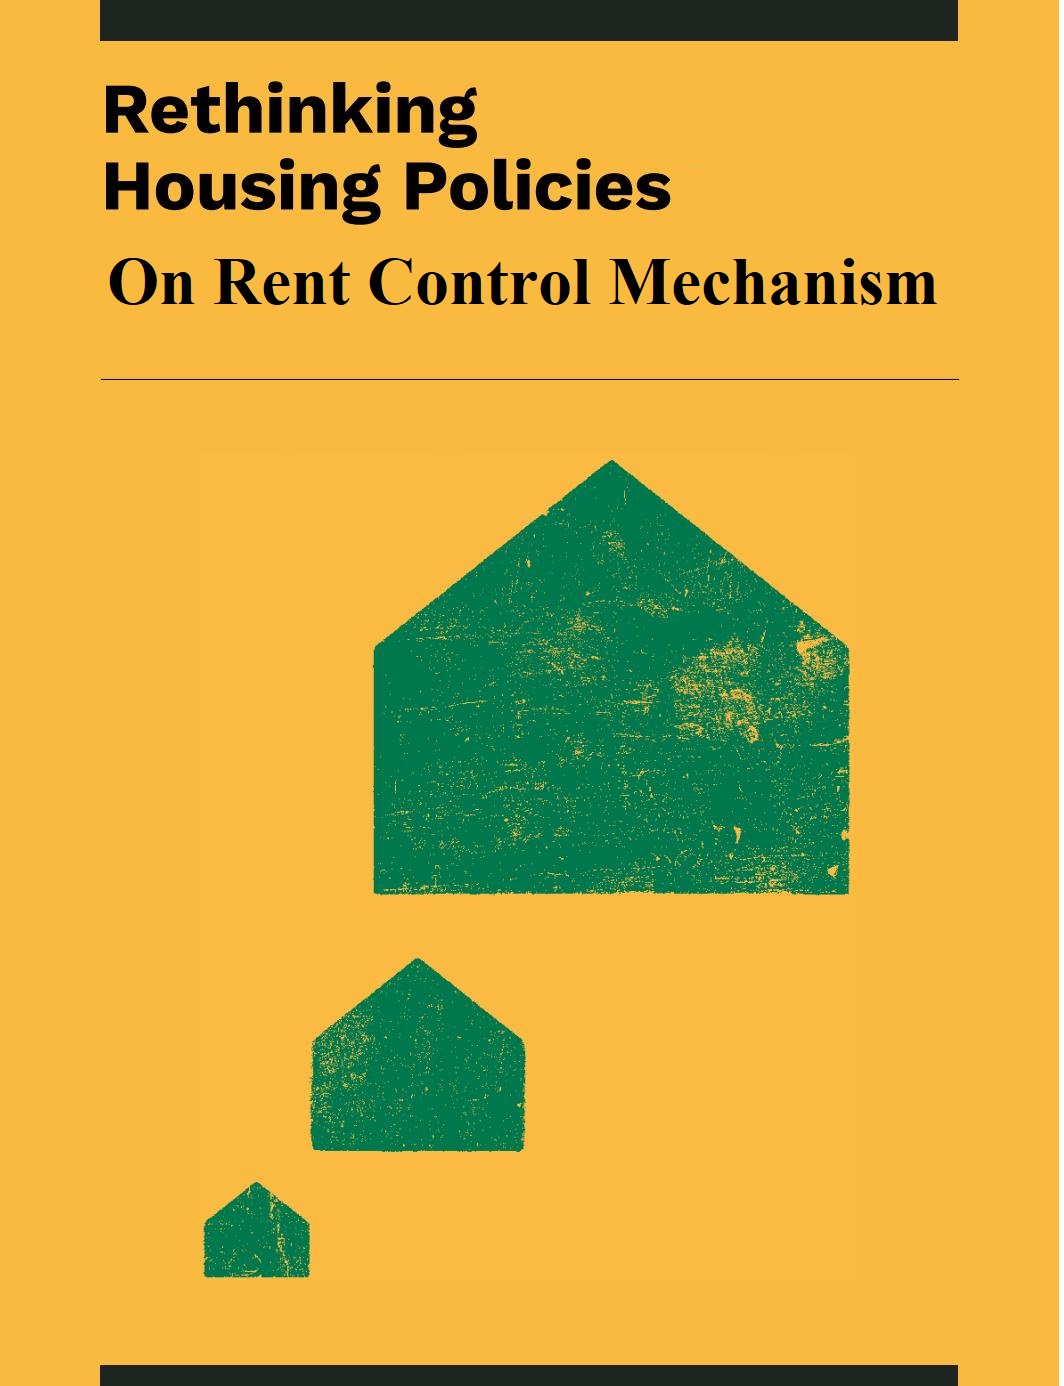 Need for a rethink on rent control mechanisms